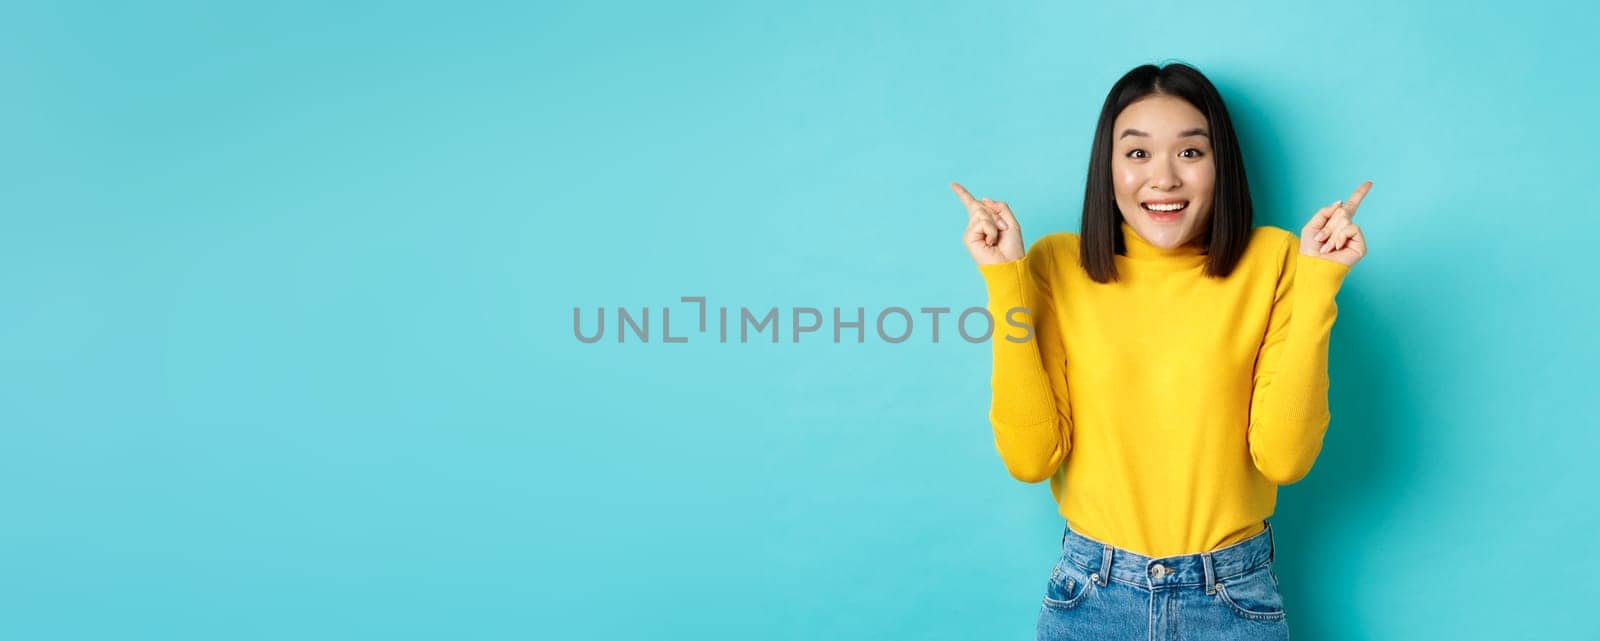 Beauty and fashion concept. Cheerful asian girl showing two promo offers, pointing fingers sideways at left and right advertisements and smiling, standing over blue background.